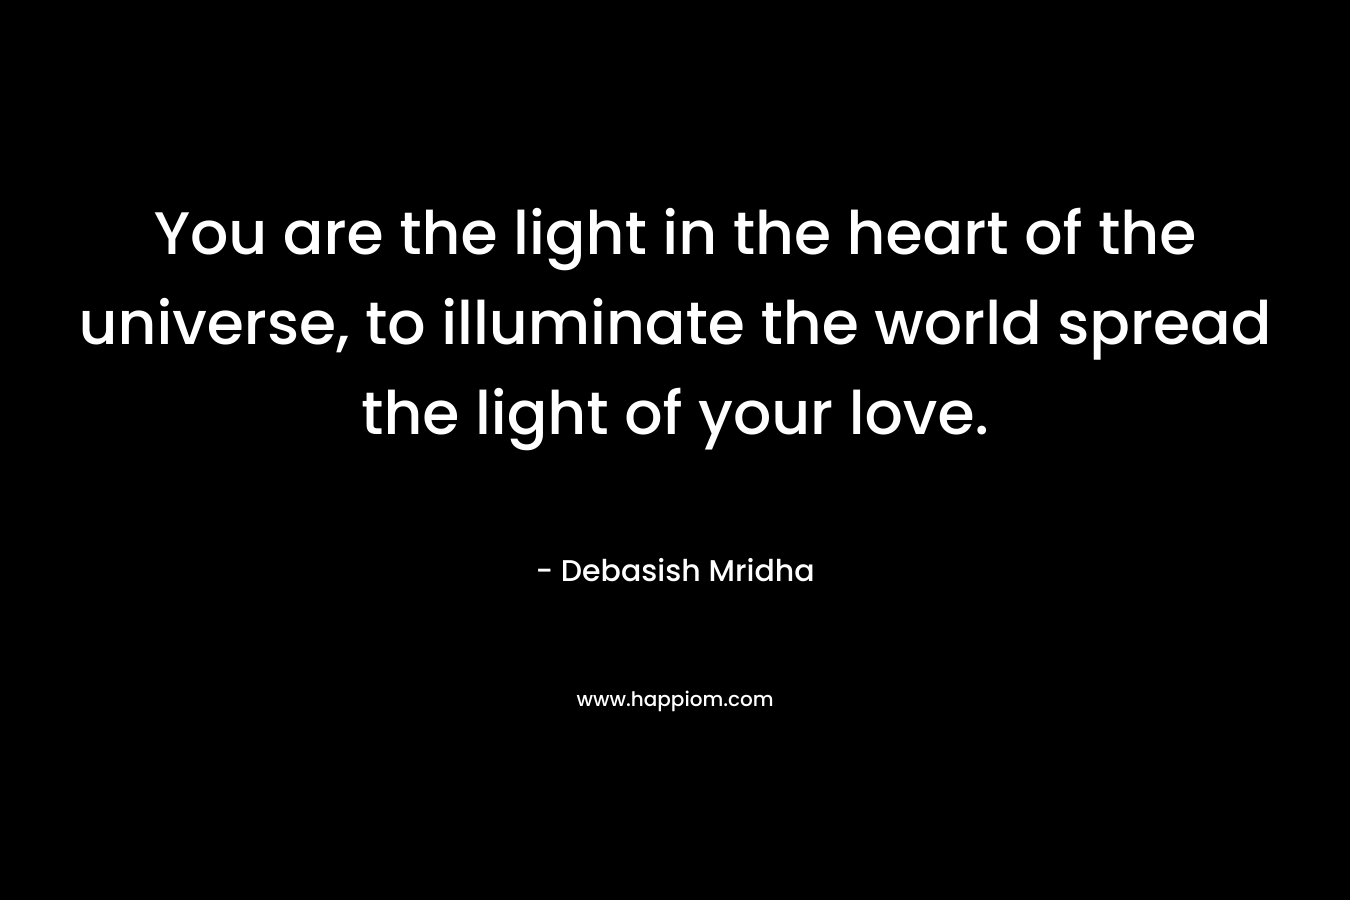 You are the light in the heart of the universe, to illuminate the world spread the light of your love.